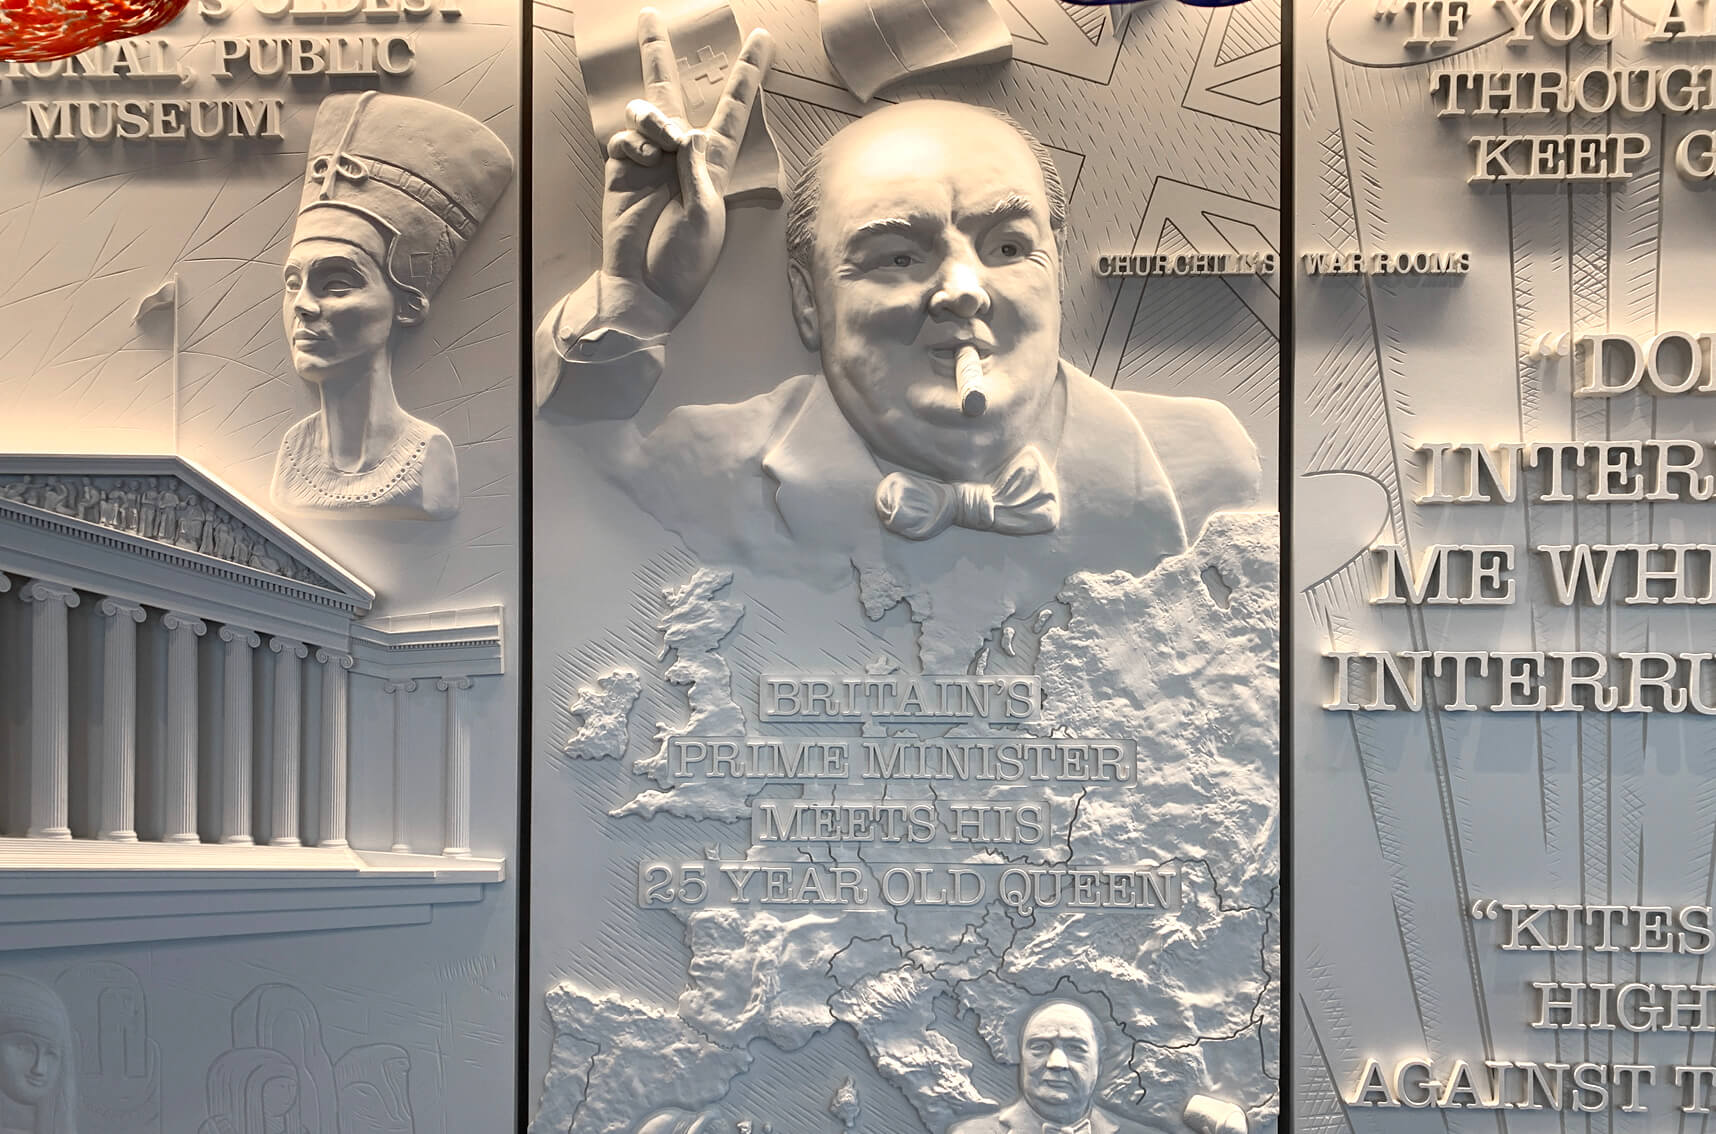 Commissioned bas relief sculpture